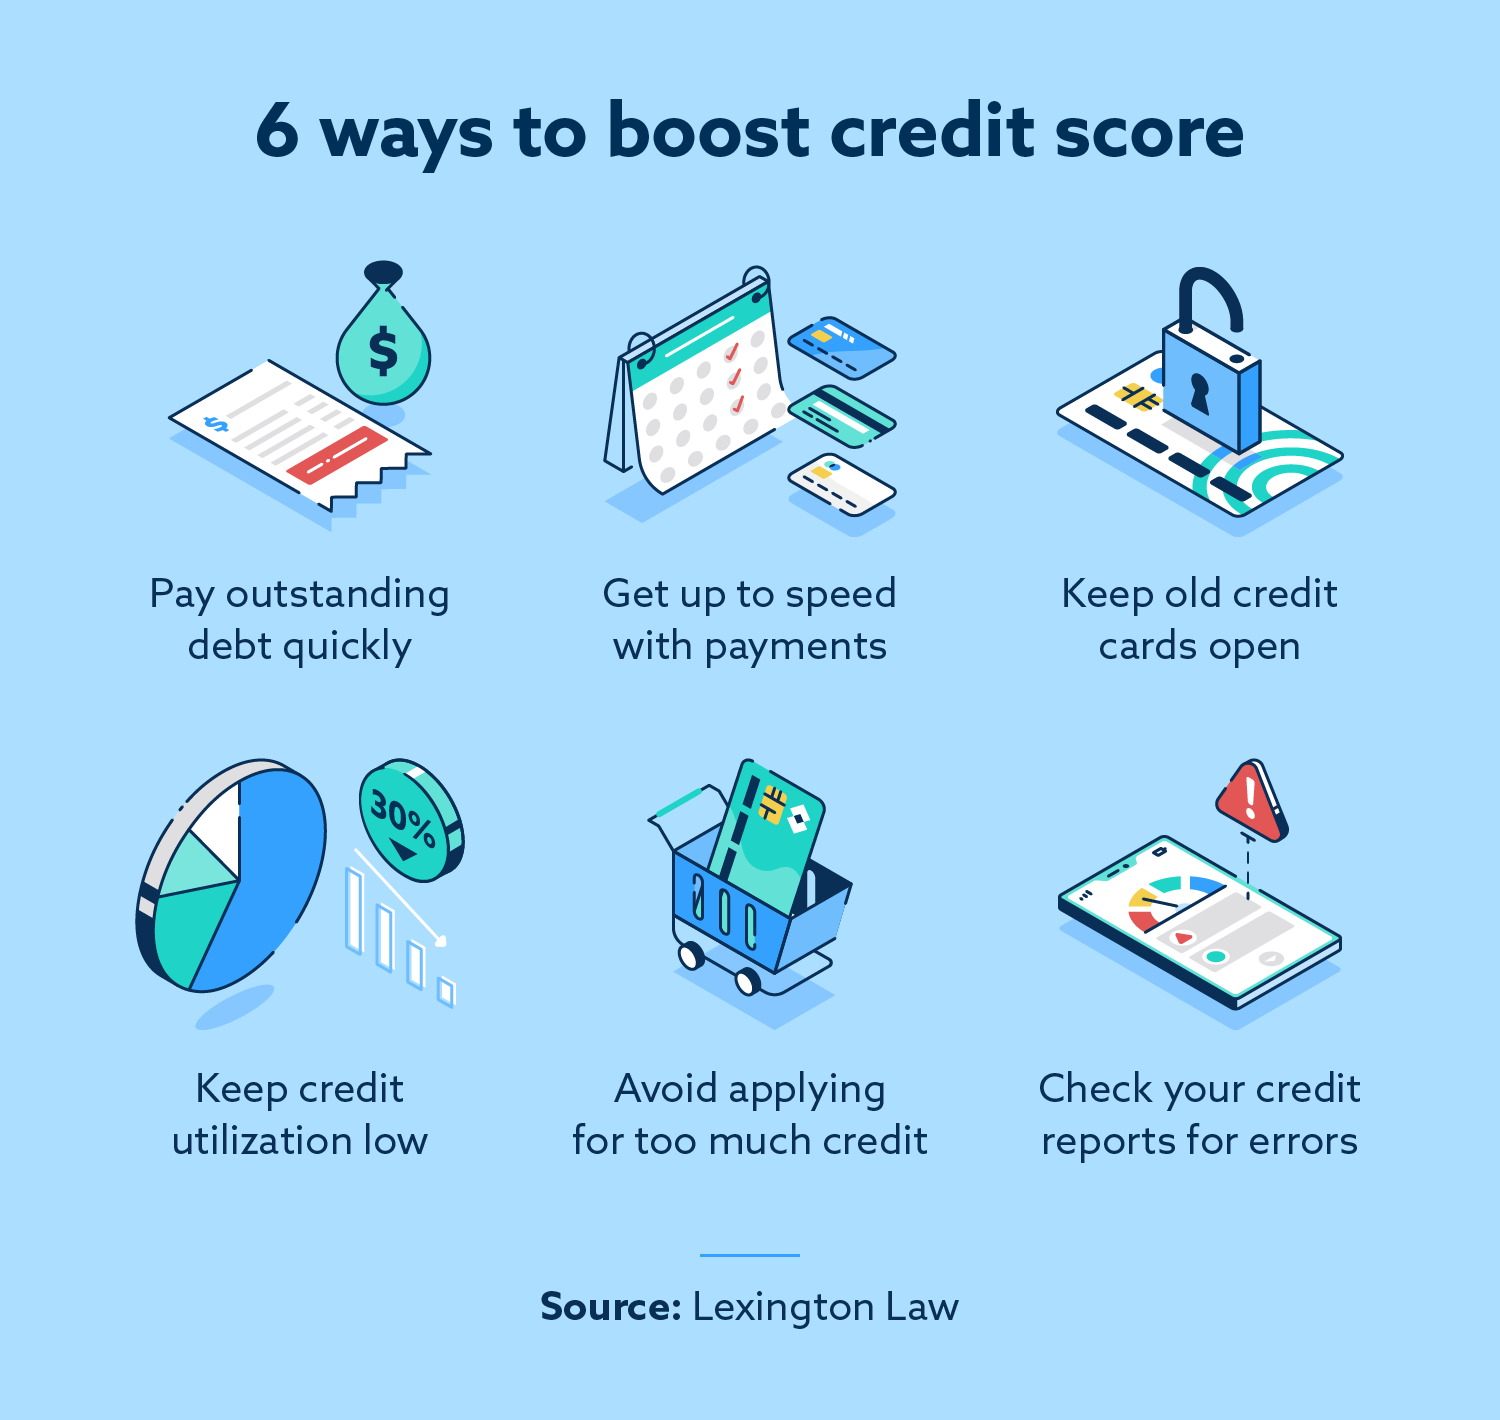 How Long After Credit Repair Can I Buy A House?